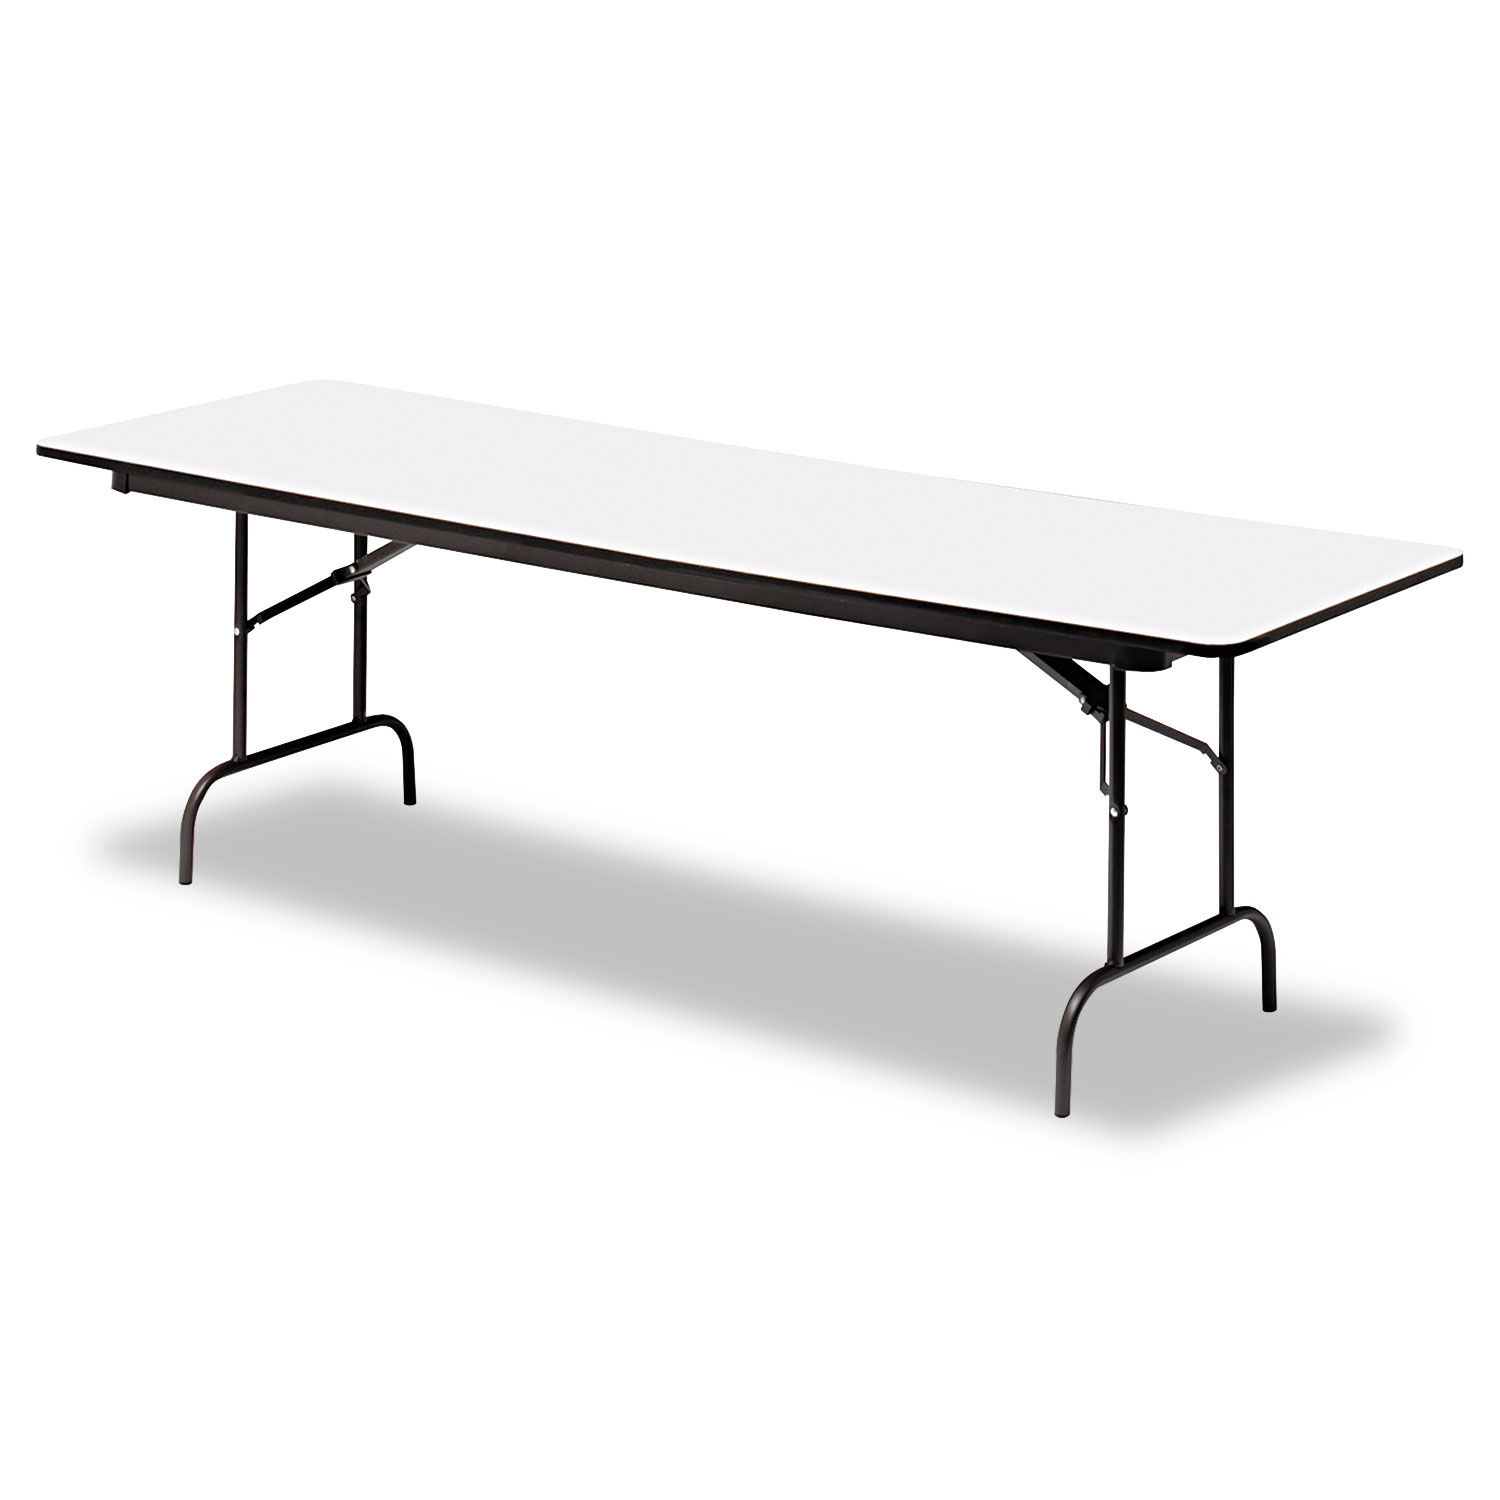 OfficeWorks Commercial Wood-Laminate Folding Table Rectangular Top, 96w x 30d x 29h, Gray/Charcoal